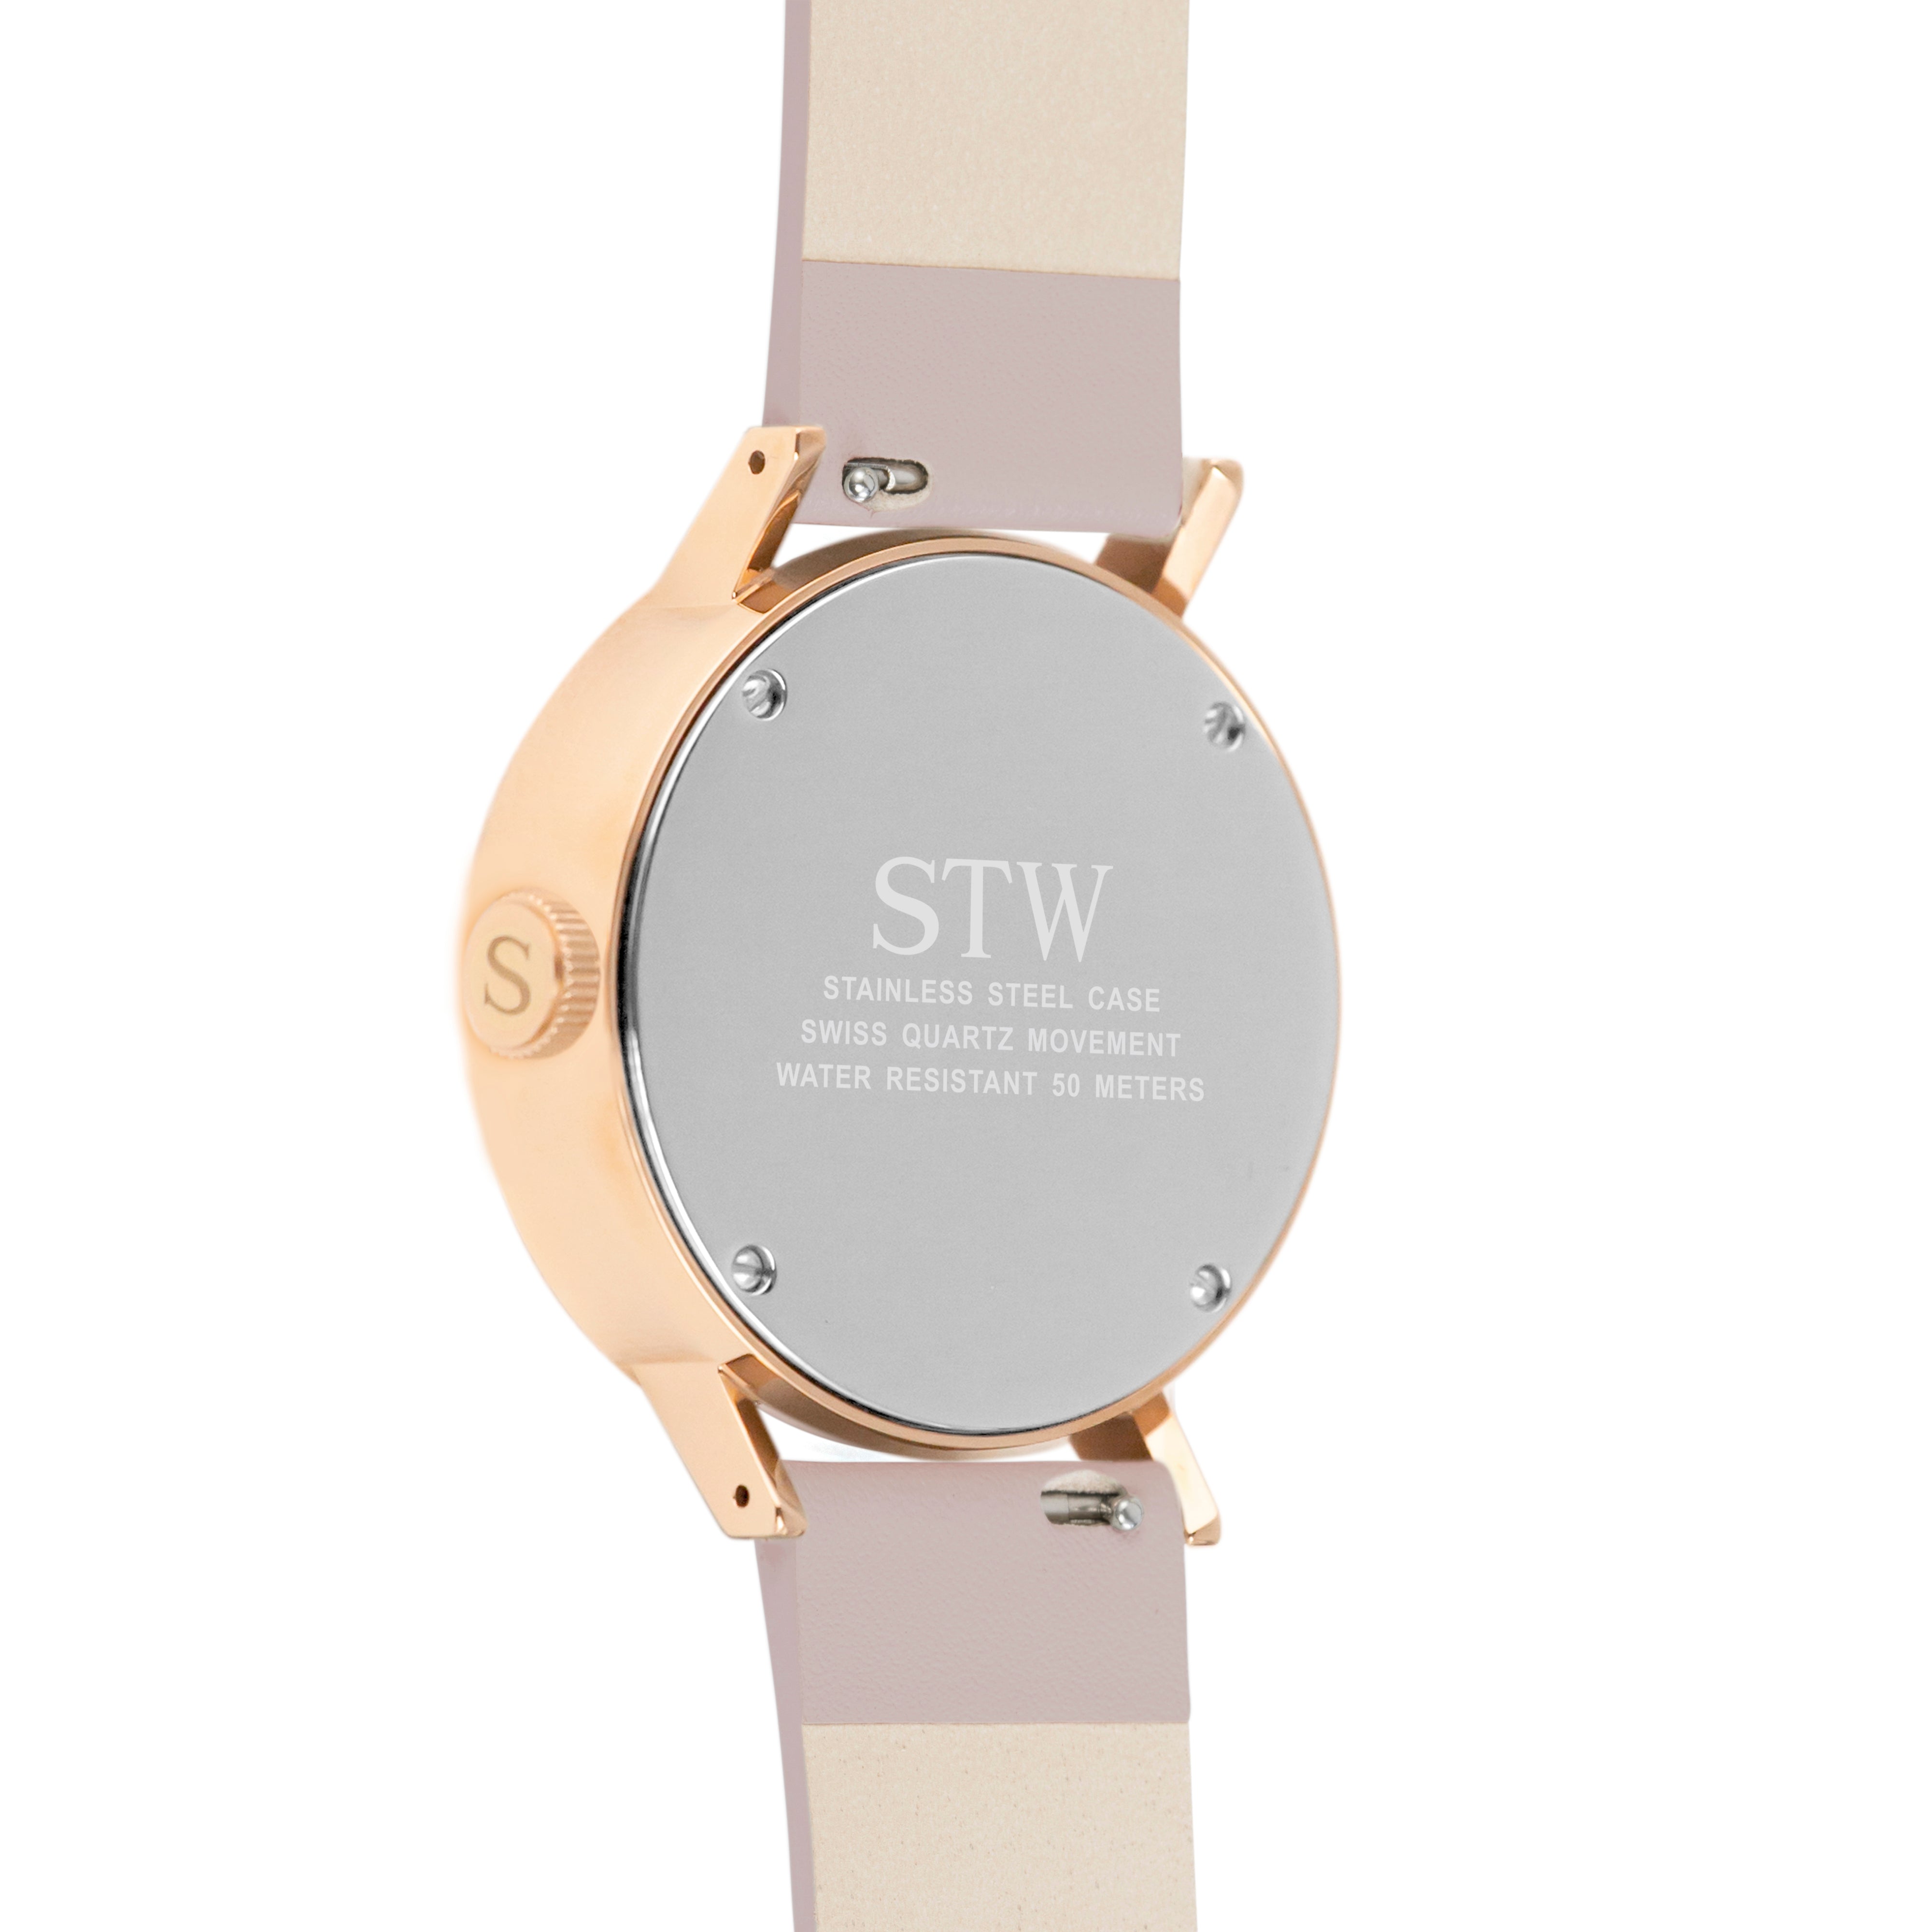 CUT OUT -  WHITE DIAL / PINK LEATHER STRAP WATCH